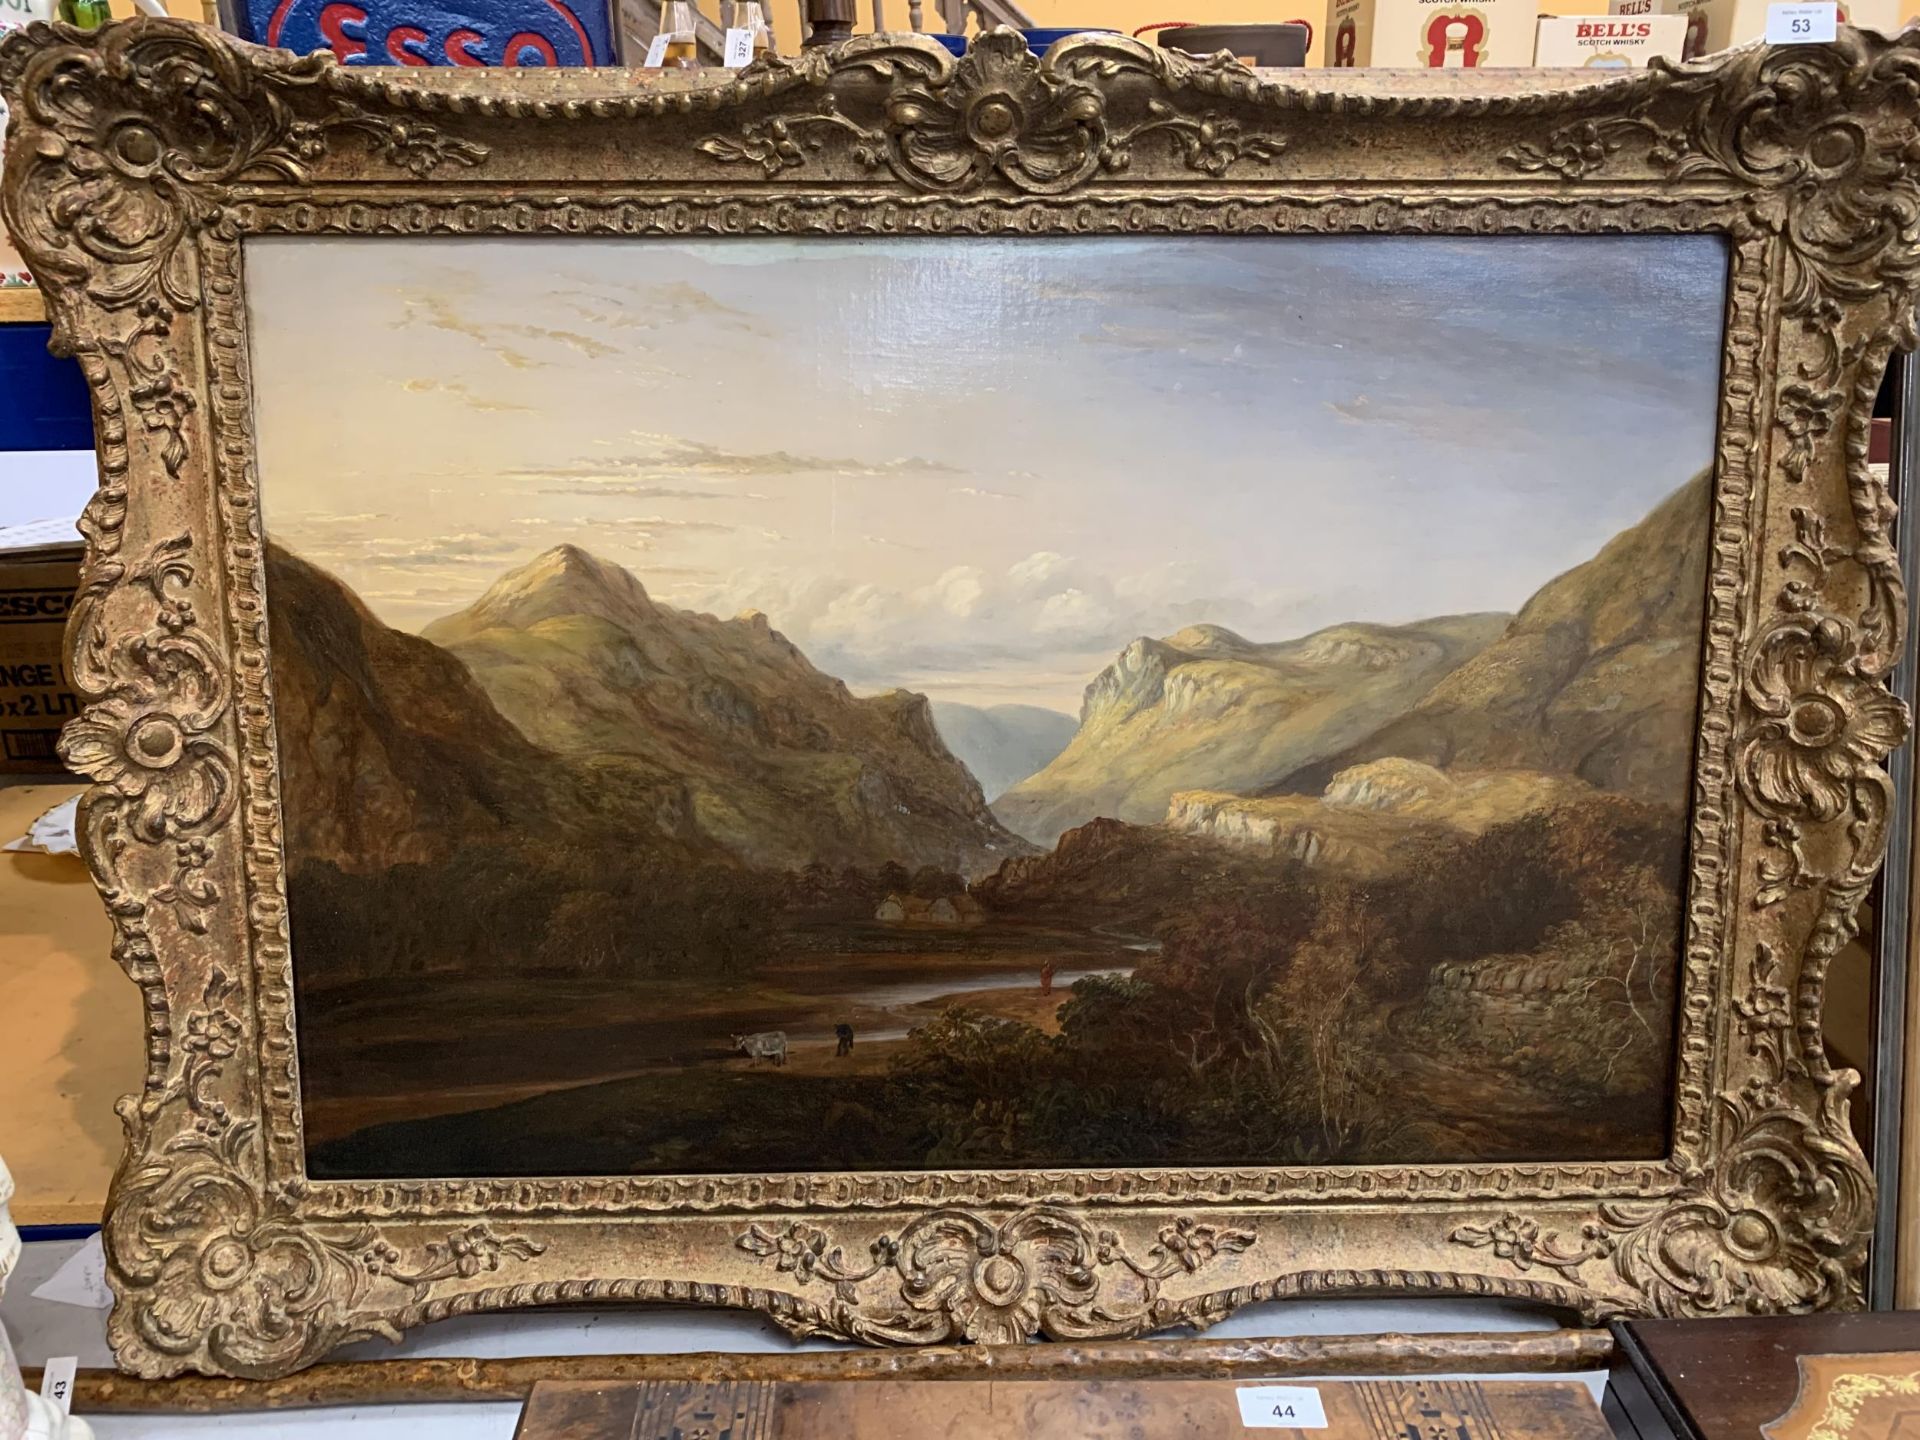 A LARGE GILT FRAMED OIL ON CANVAS BY HENRY G DUGUID 'GLENME' - SOLD AS LOT 108 AT SOTHEBYS ON 14.